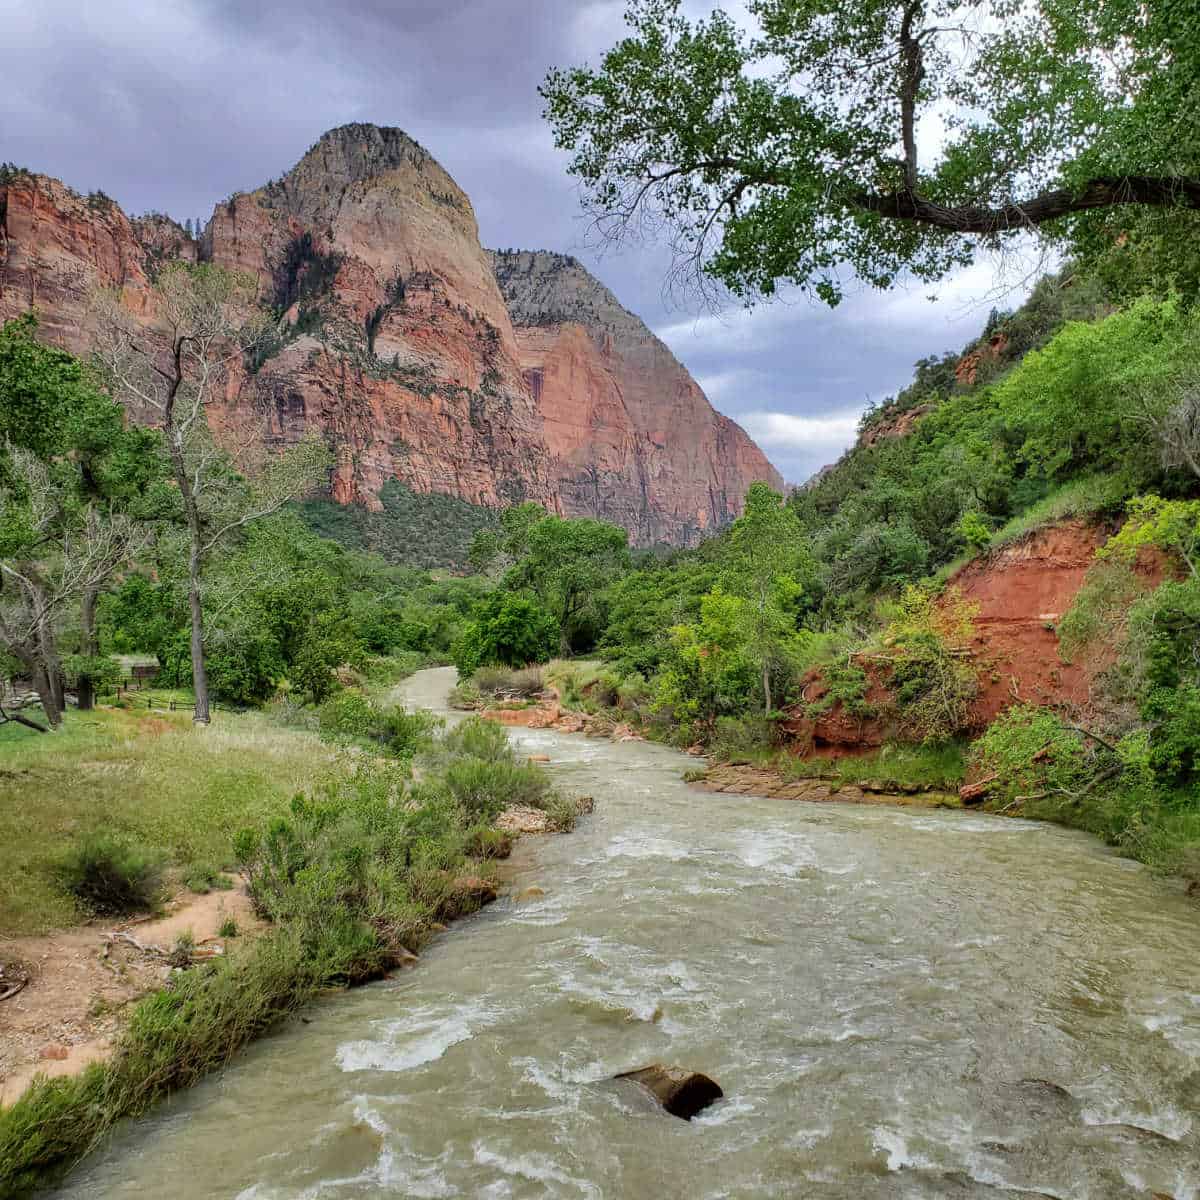 Crossing the Virgin River on the Emerald Pools Trail and looking up Zion Canyon